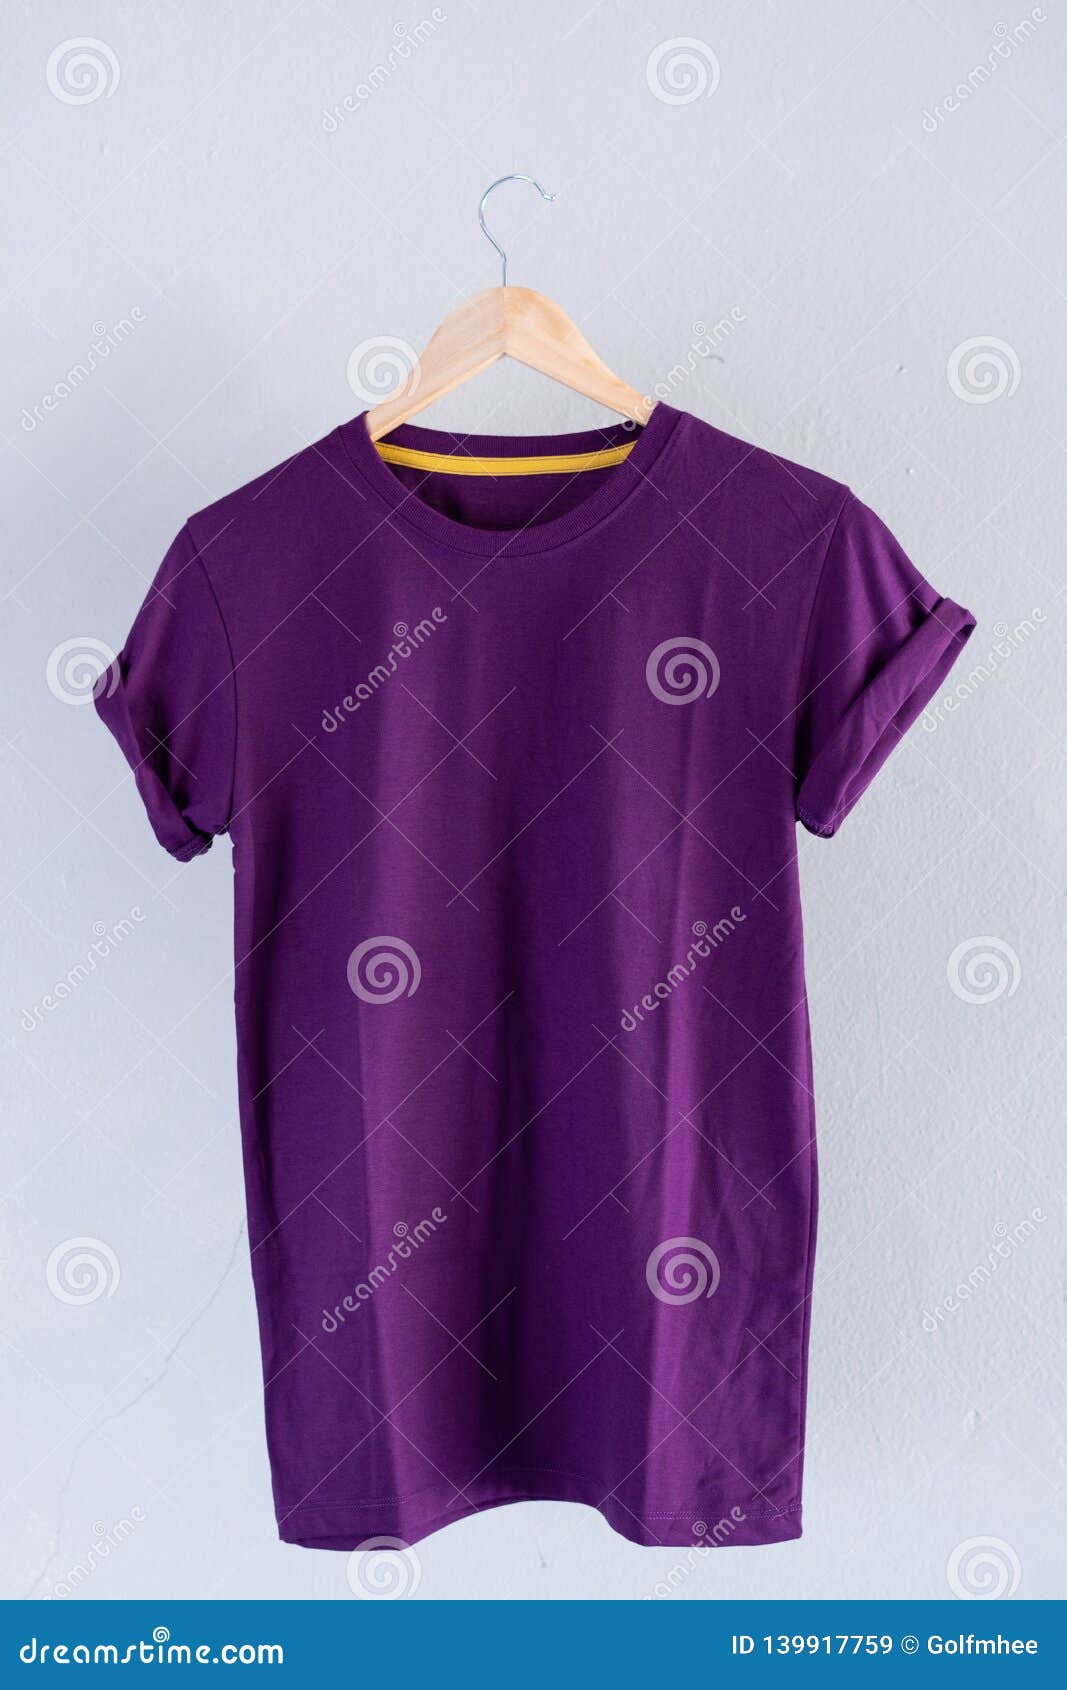 Retro Fold Purple Cotton T-Shirt Clothes Mock Up Template on Grunge ...